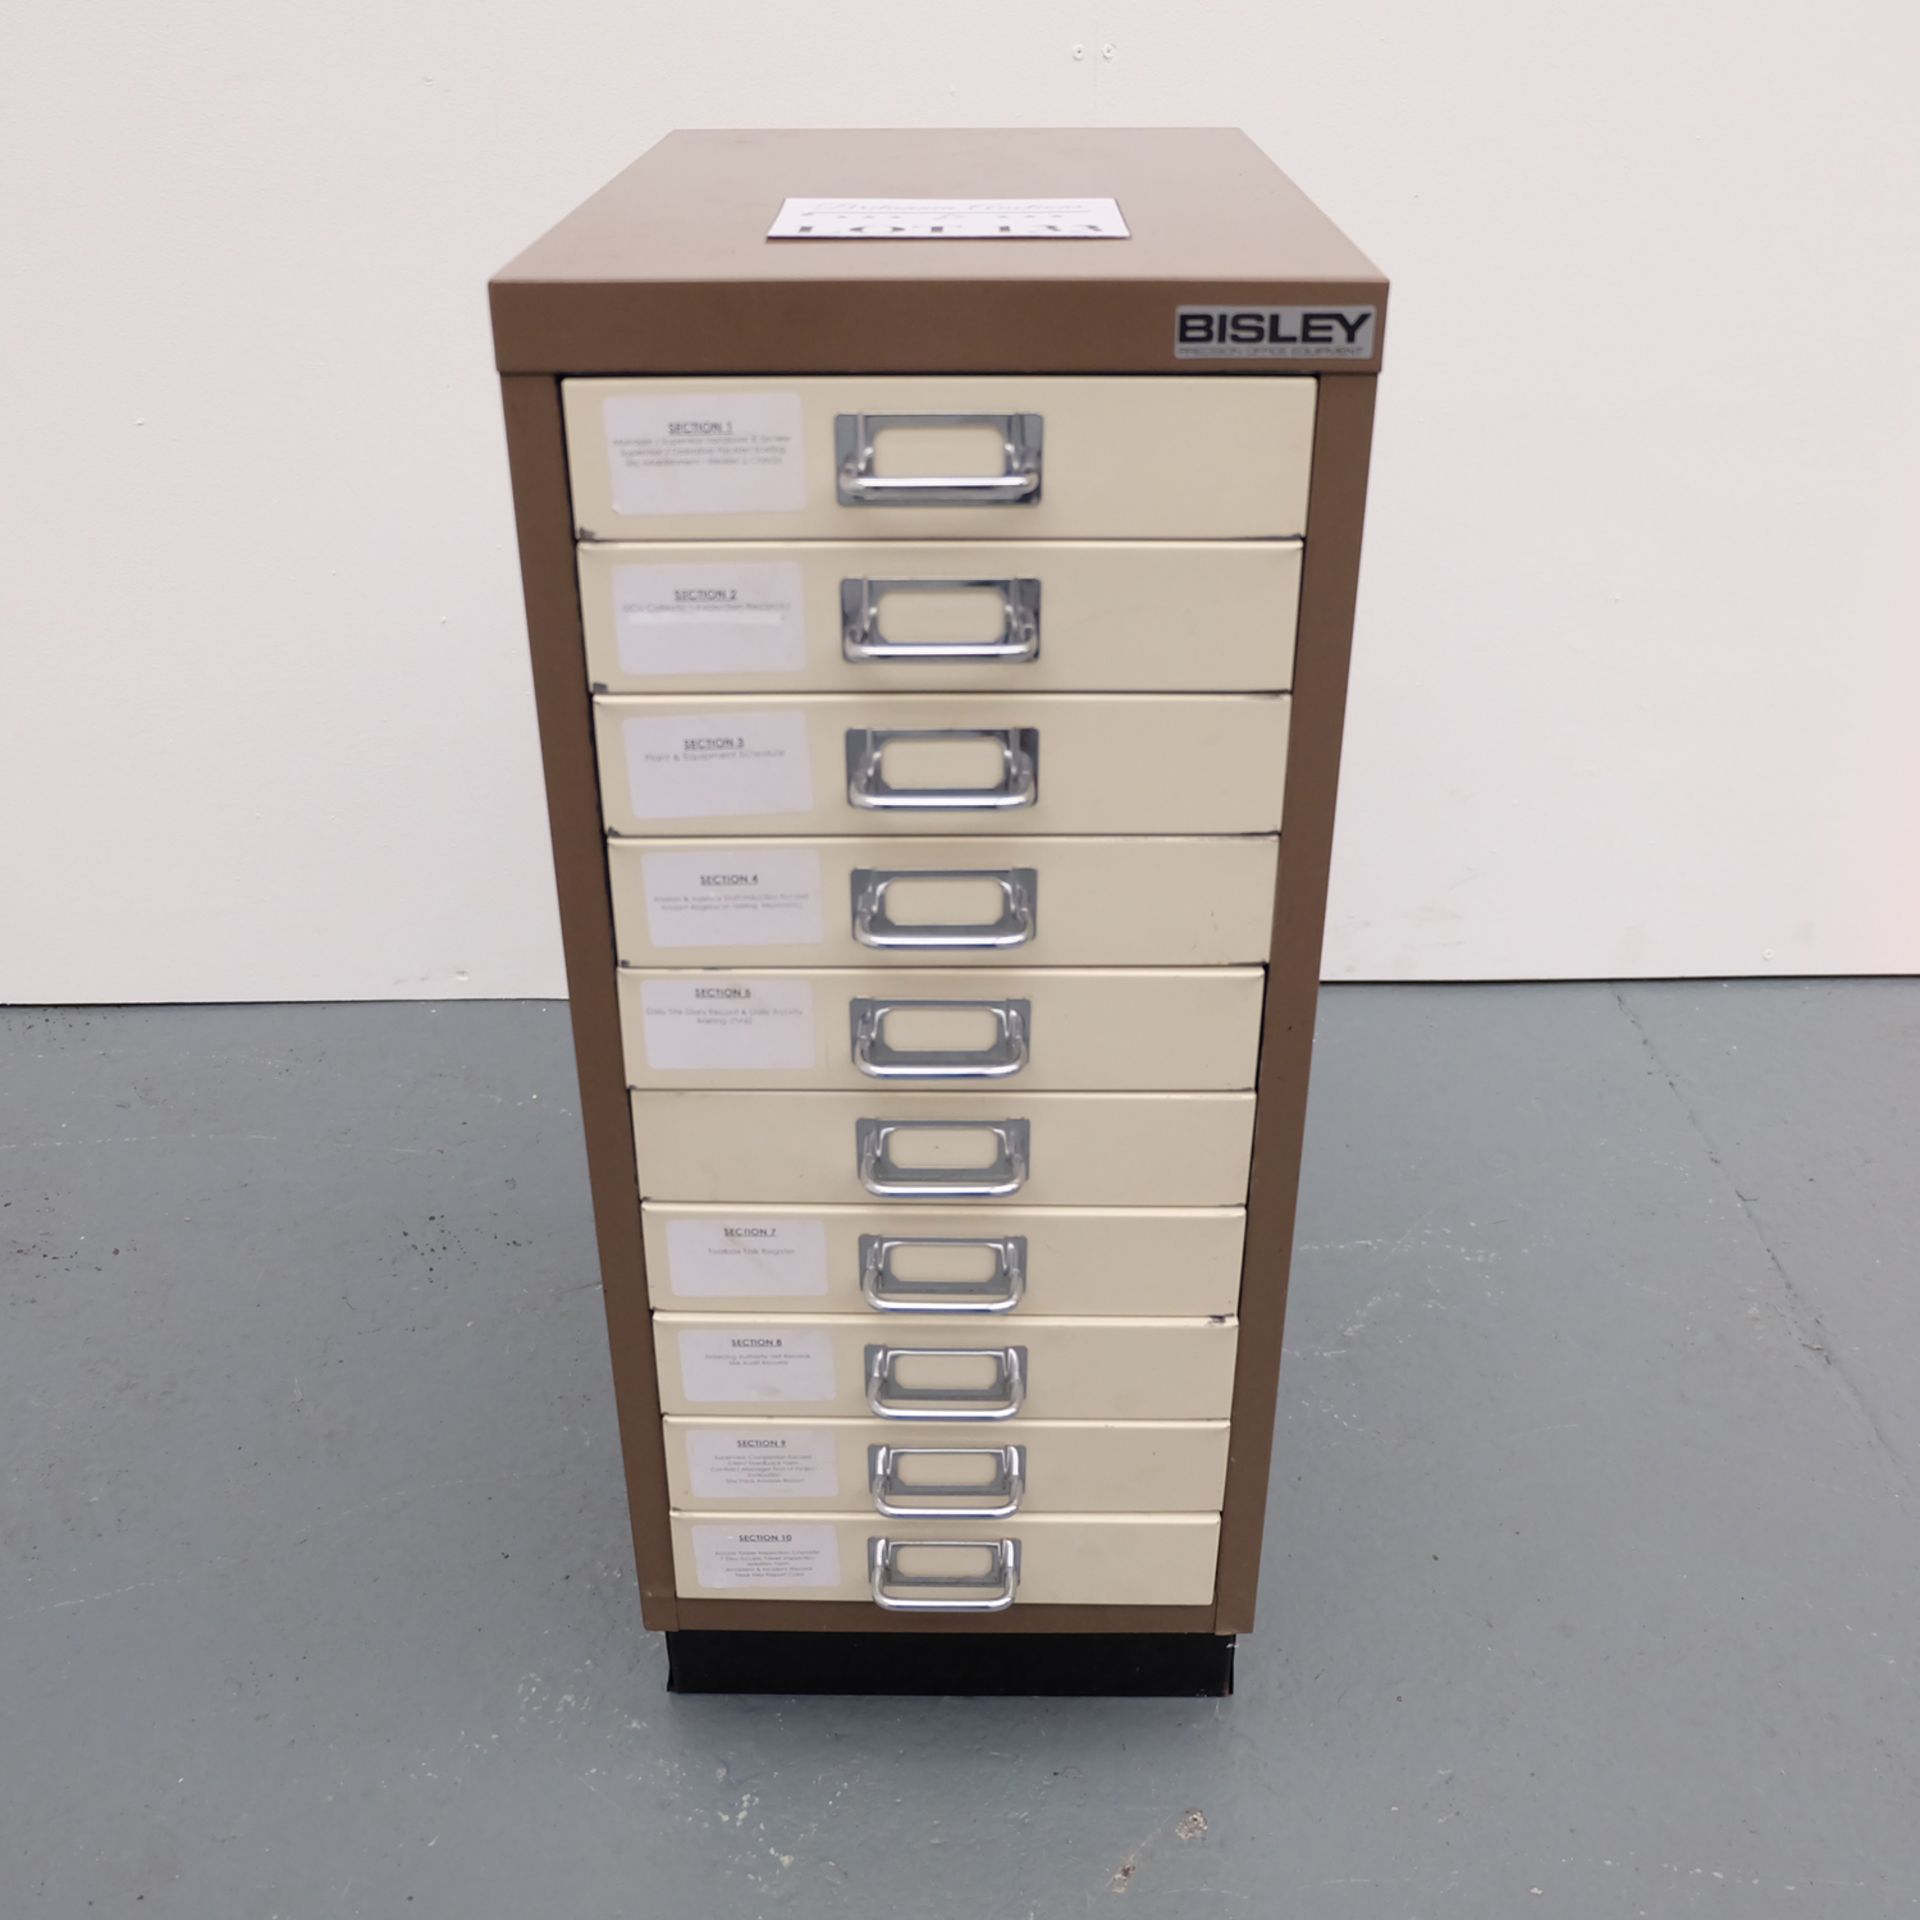 BISLEY Set of Drawers. 280mm x 410mm x 675mm High Approx. - Image 2 of 6